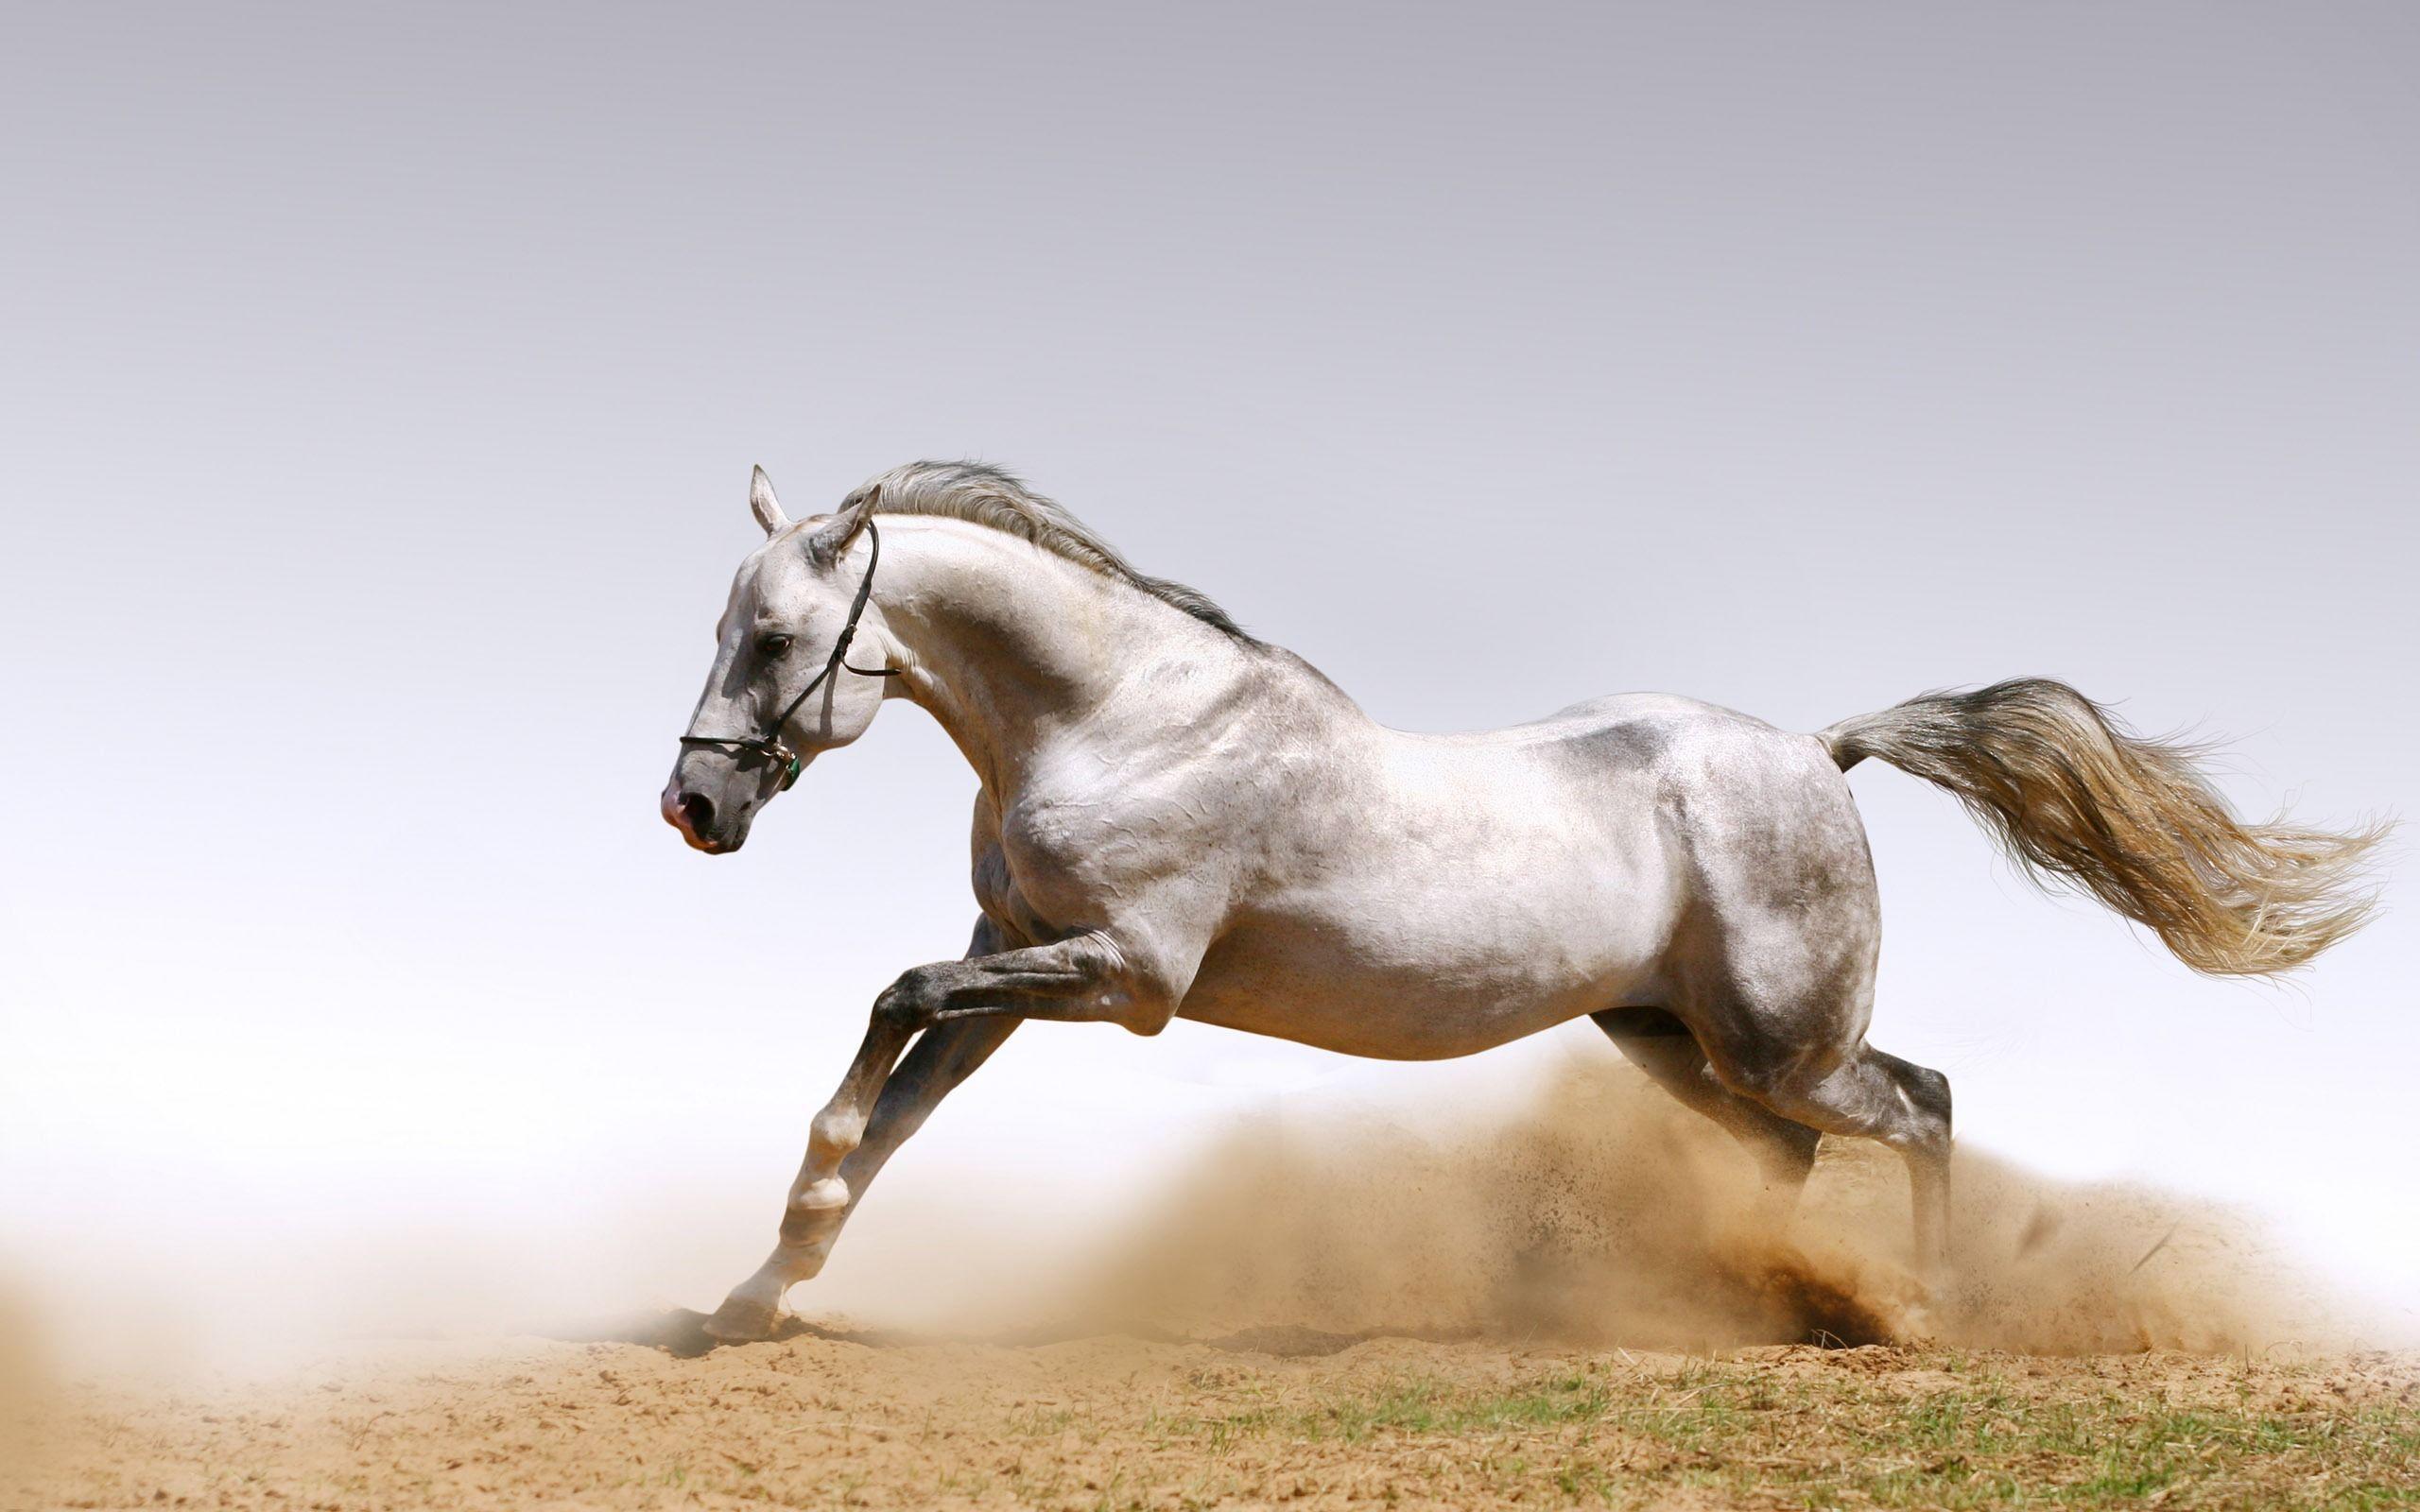 A Selection Of 10 Image Of Horses In Hd Quality - Racing Horse Images Hd - HD Wallpaper 